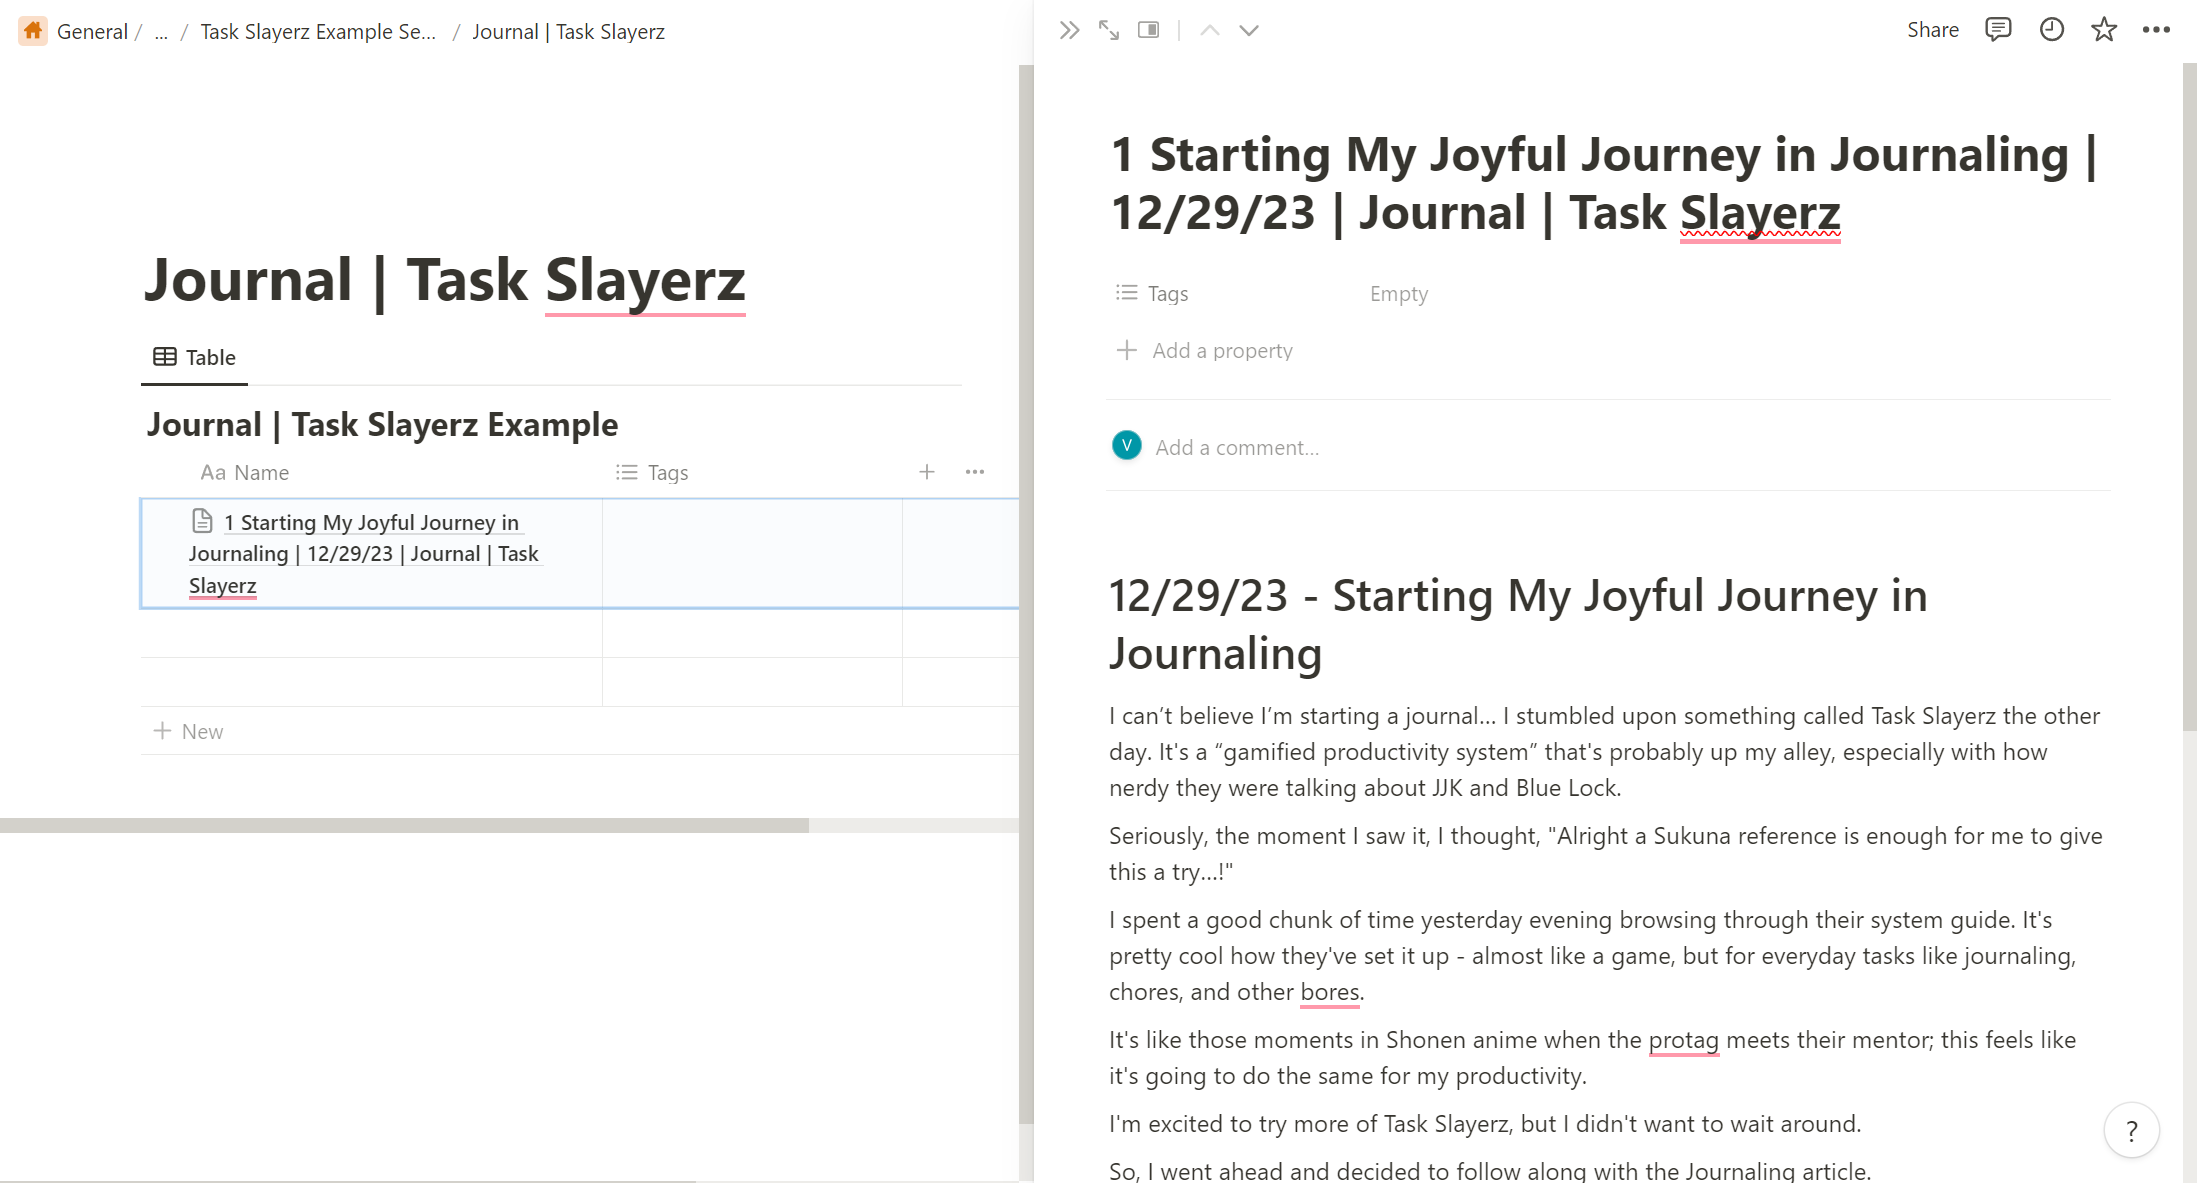 Gamifying Your Journaling Journey with Task Slayerz: A How-To Guide